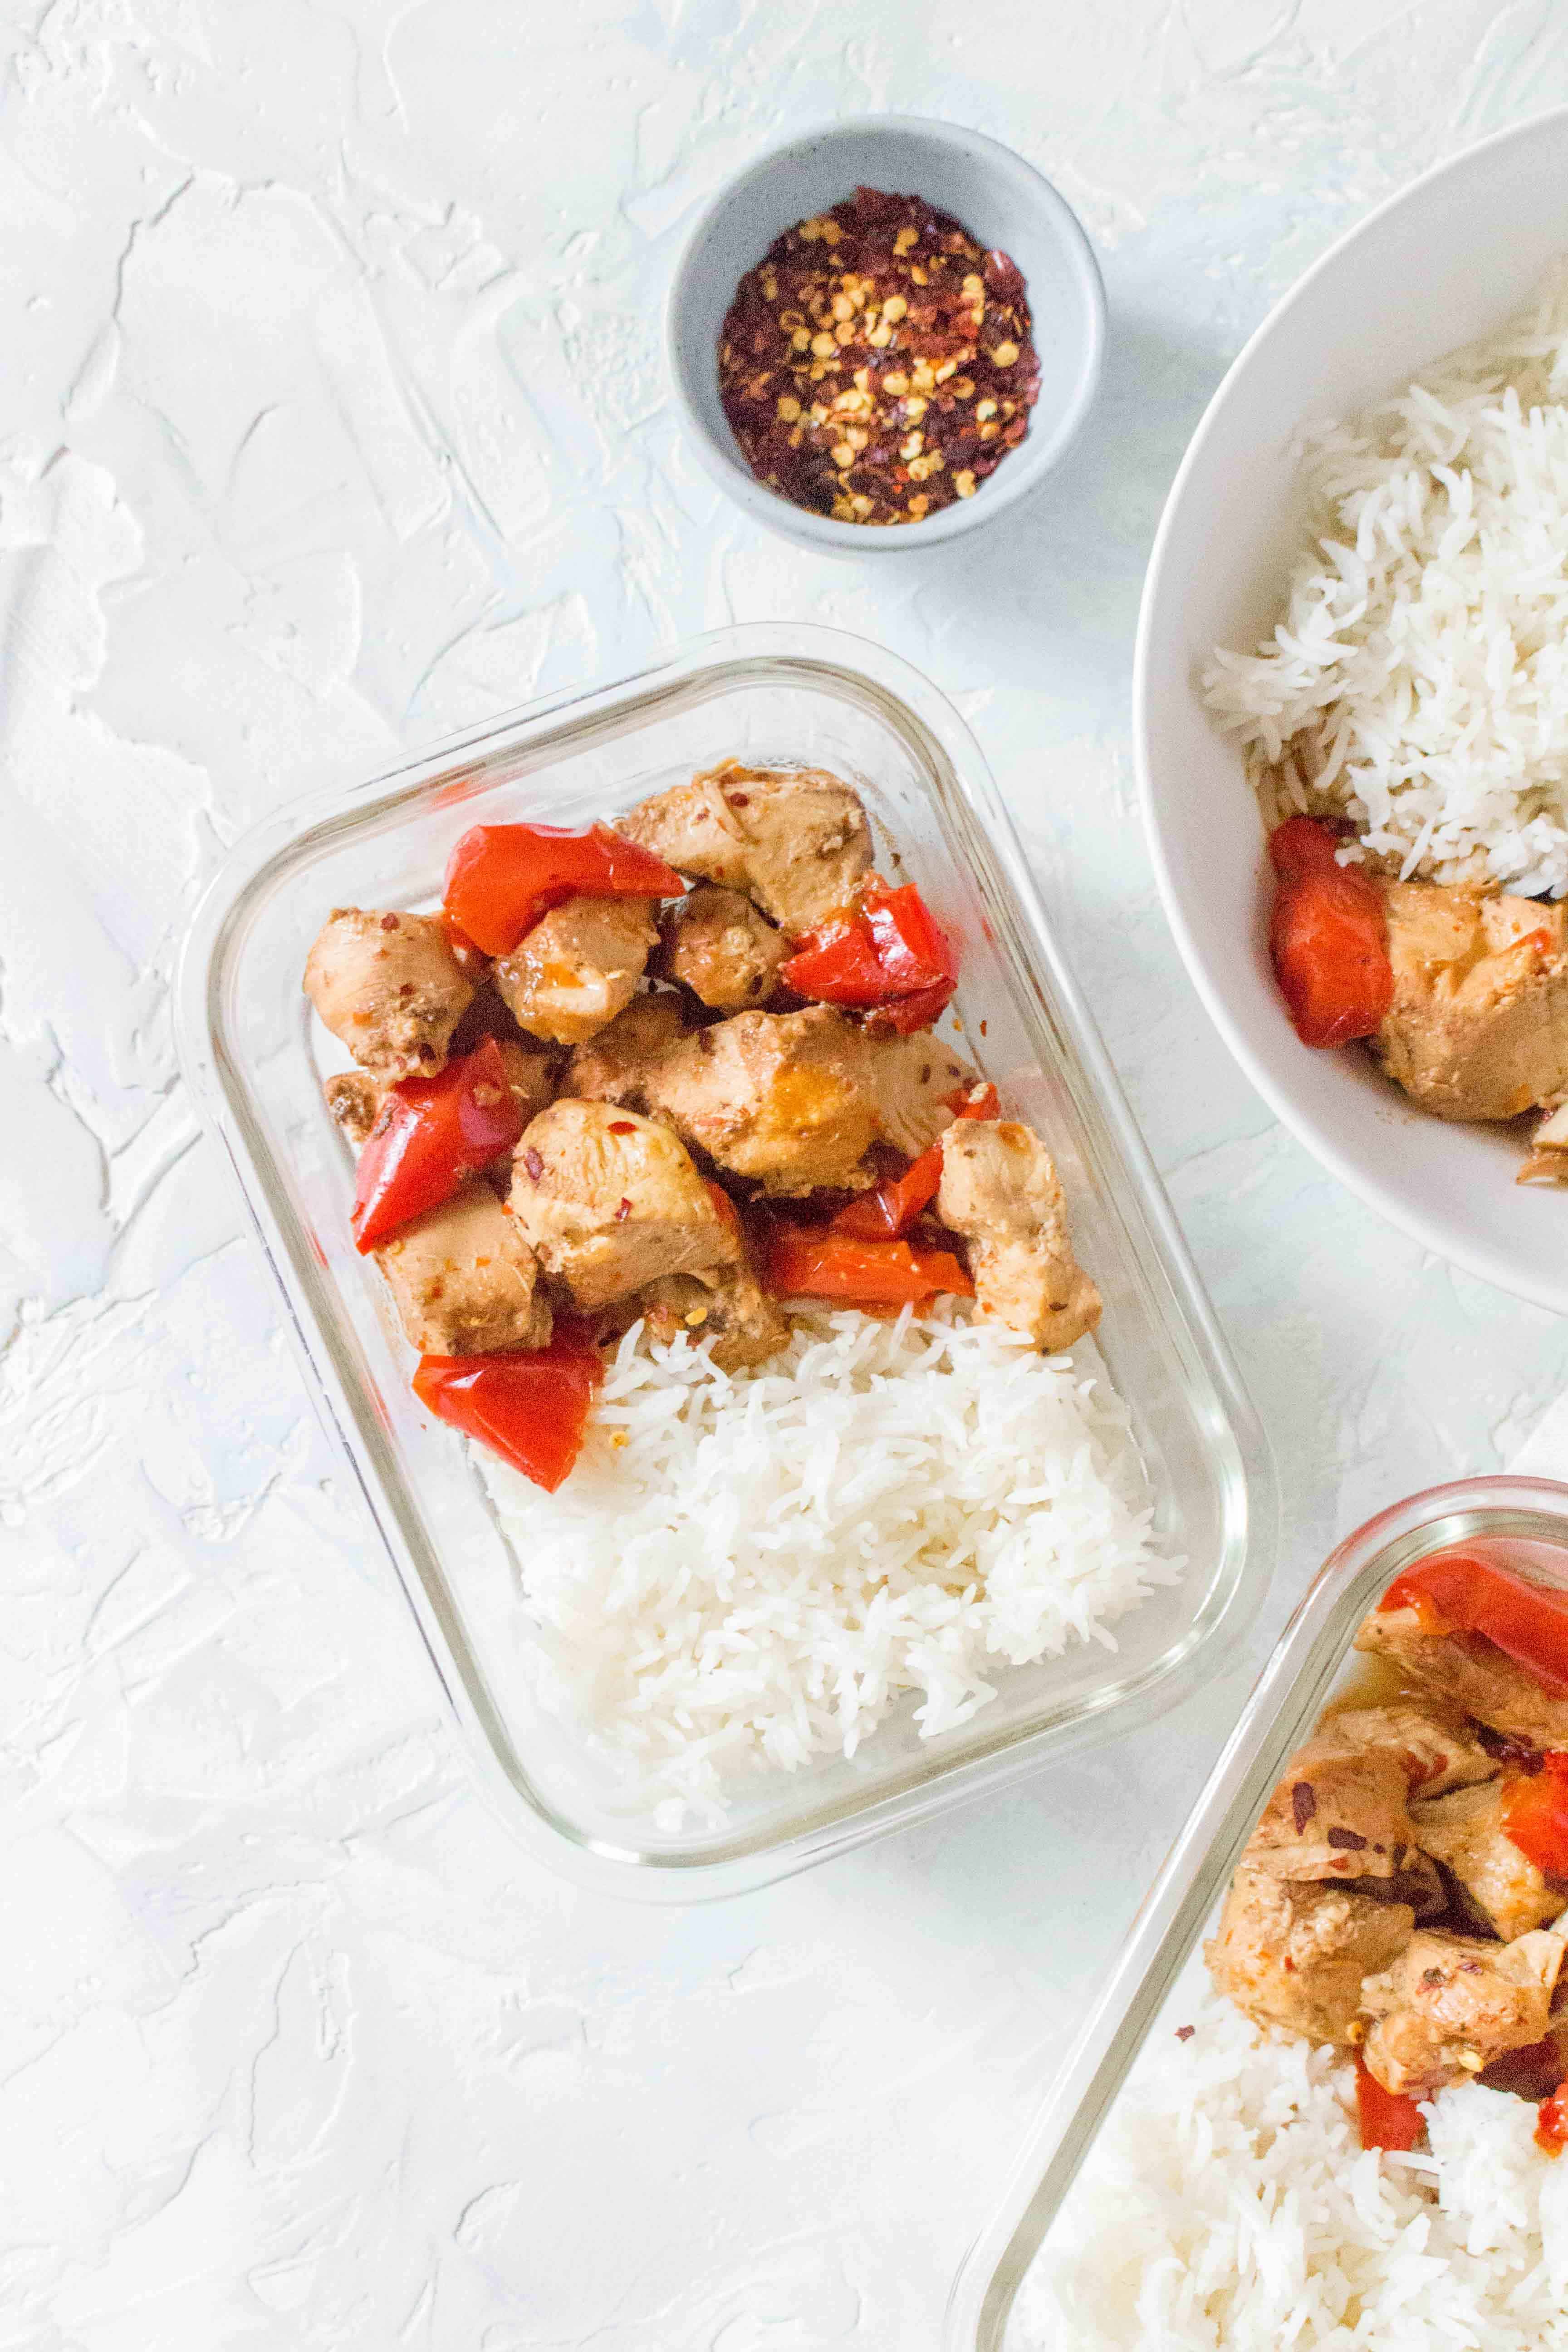 A yummy take out classic, this Instant Pot Kung Pao Chickpeas recipe is the perfect combination of sweet, salty, and spicy! The rice is made pot in pot so everything cooks together.